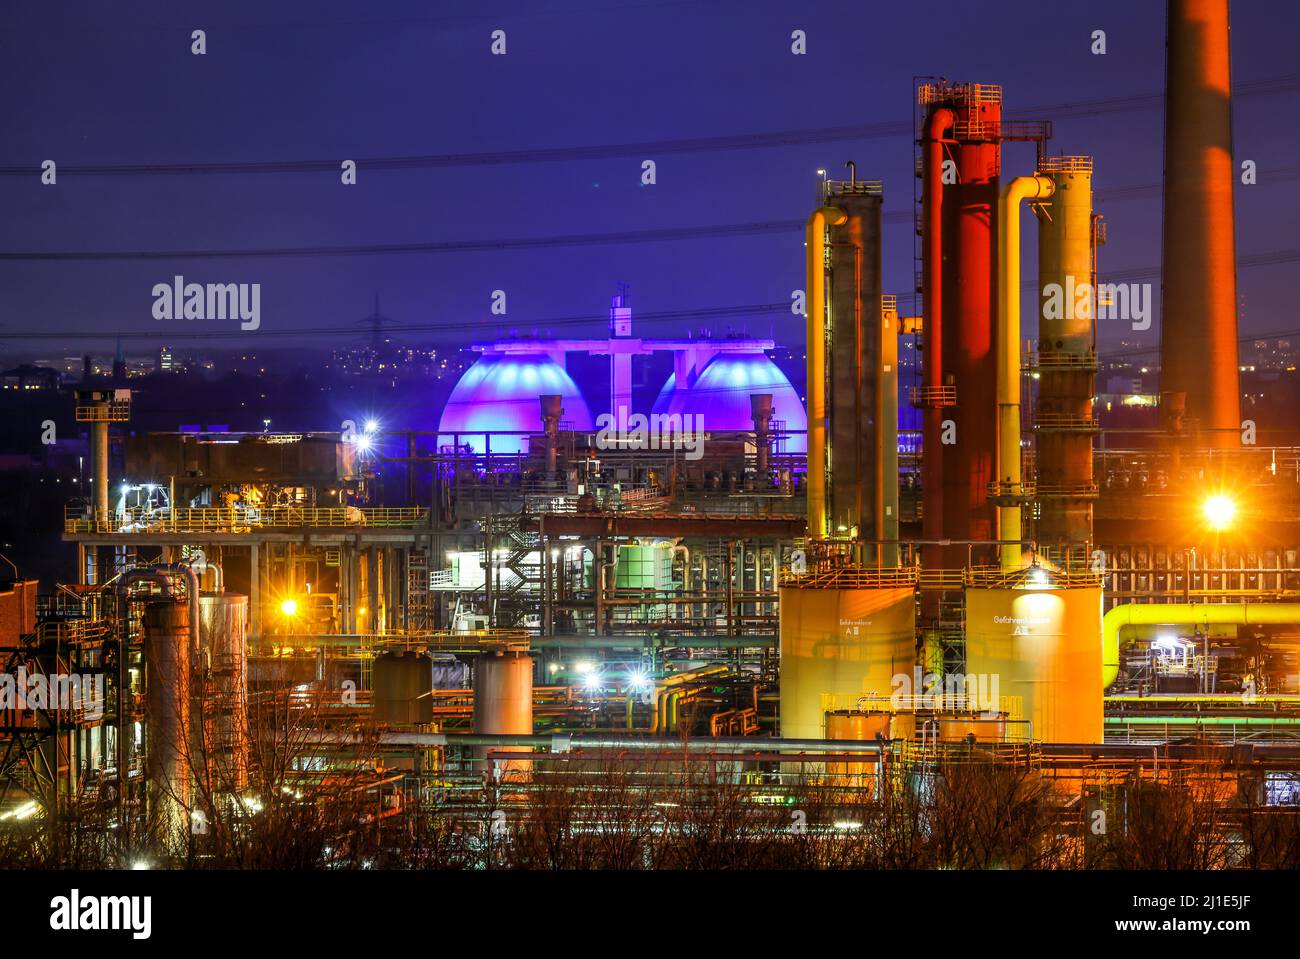 20.01.2022, Germany, North Rhine-Westphalia, Bottrop - The Prosper coking plant is one of the three operating coking plants in the Ruhr area. The Pros Stock Photo